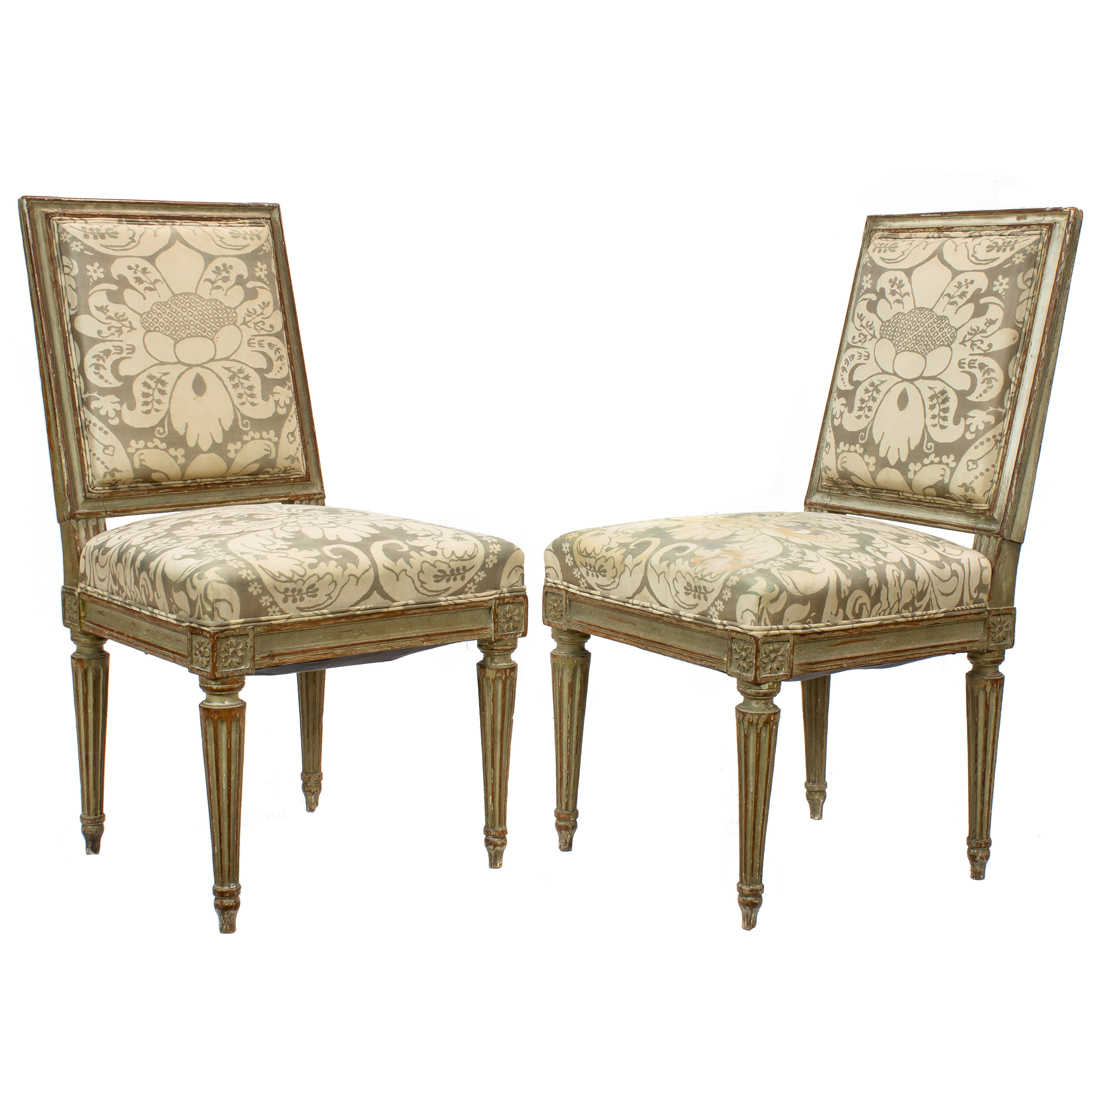 A PAIR OF FRENCH NEOCLASSICAL STYLE 3a394b